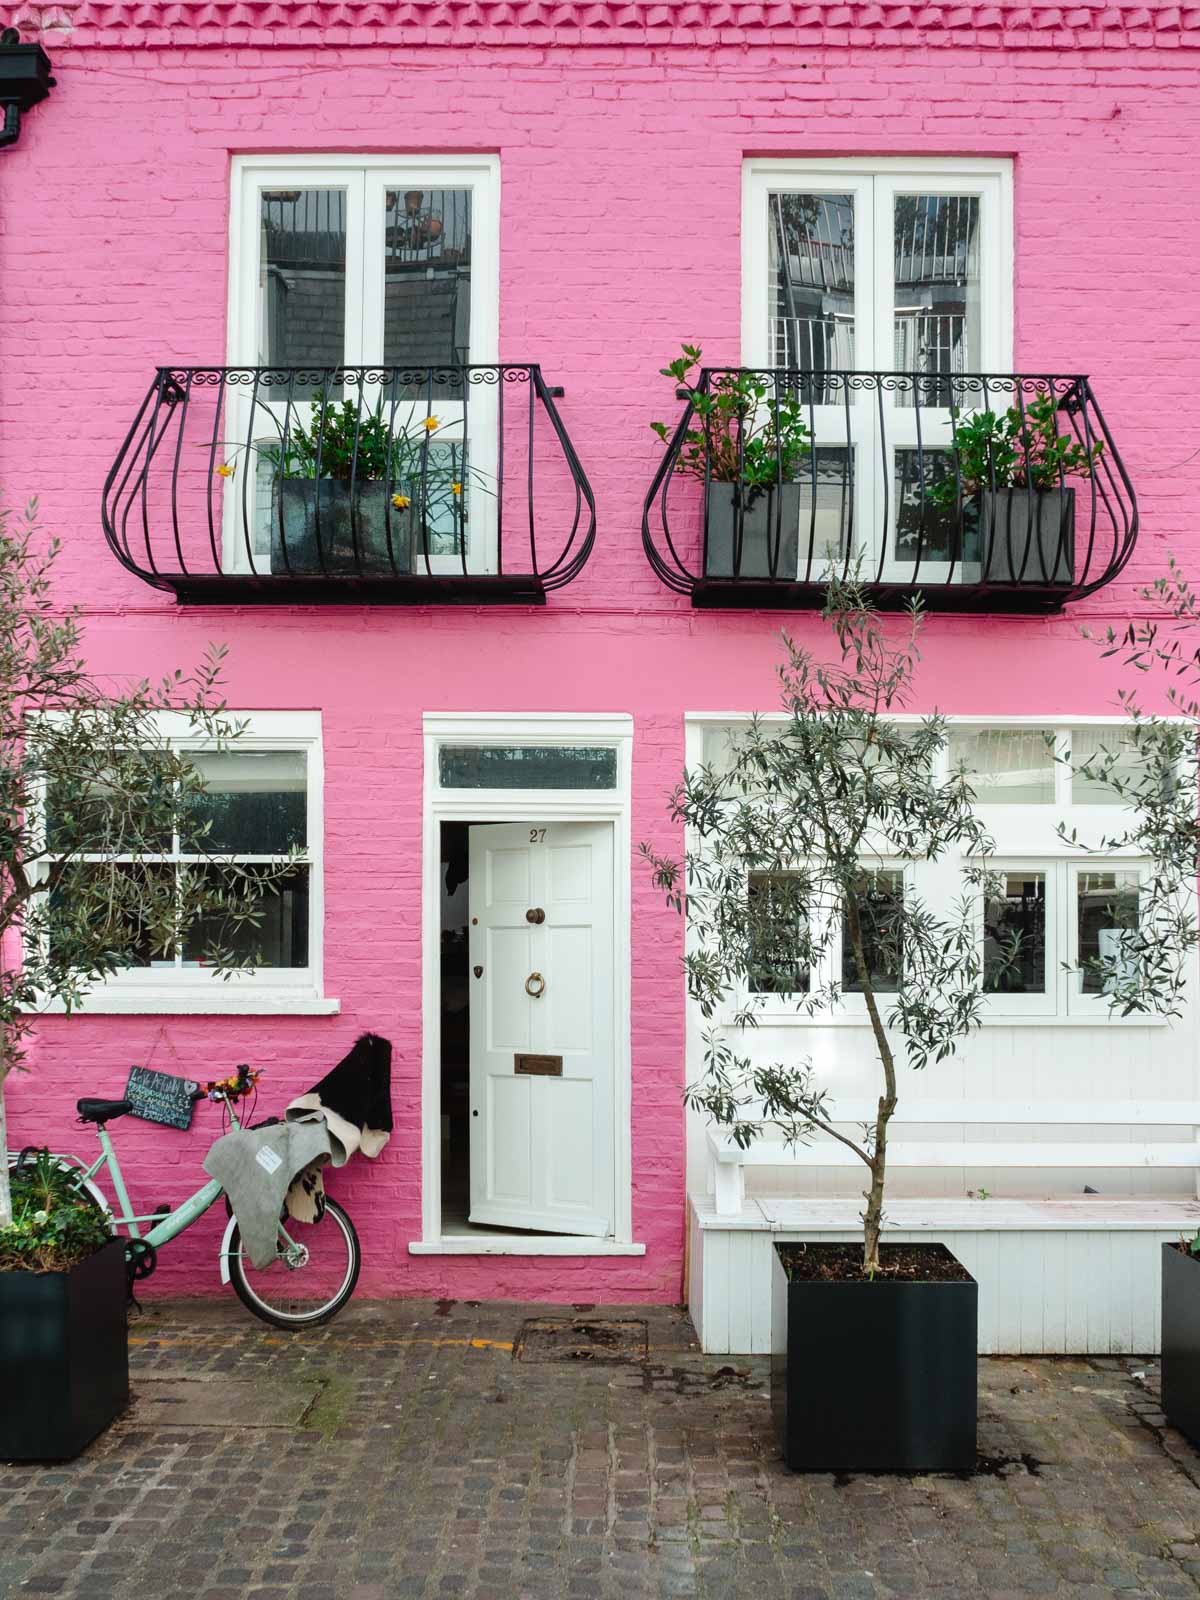 Famous Notting Hill Pink House from Love, Actually with white door and bike leaned against facade.